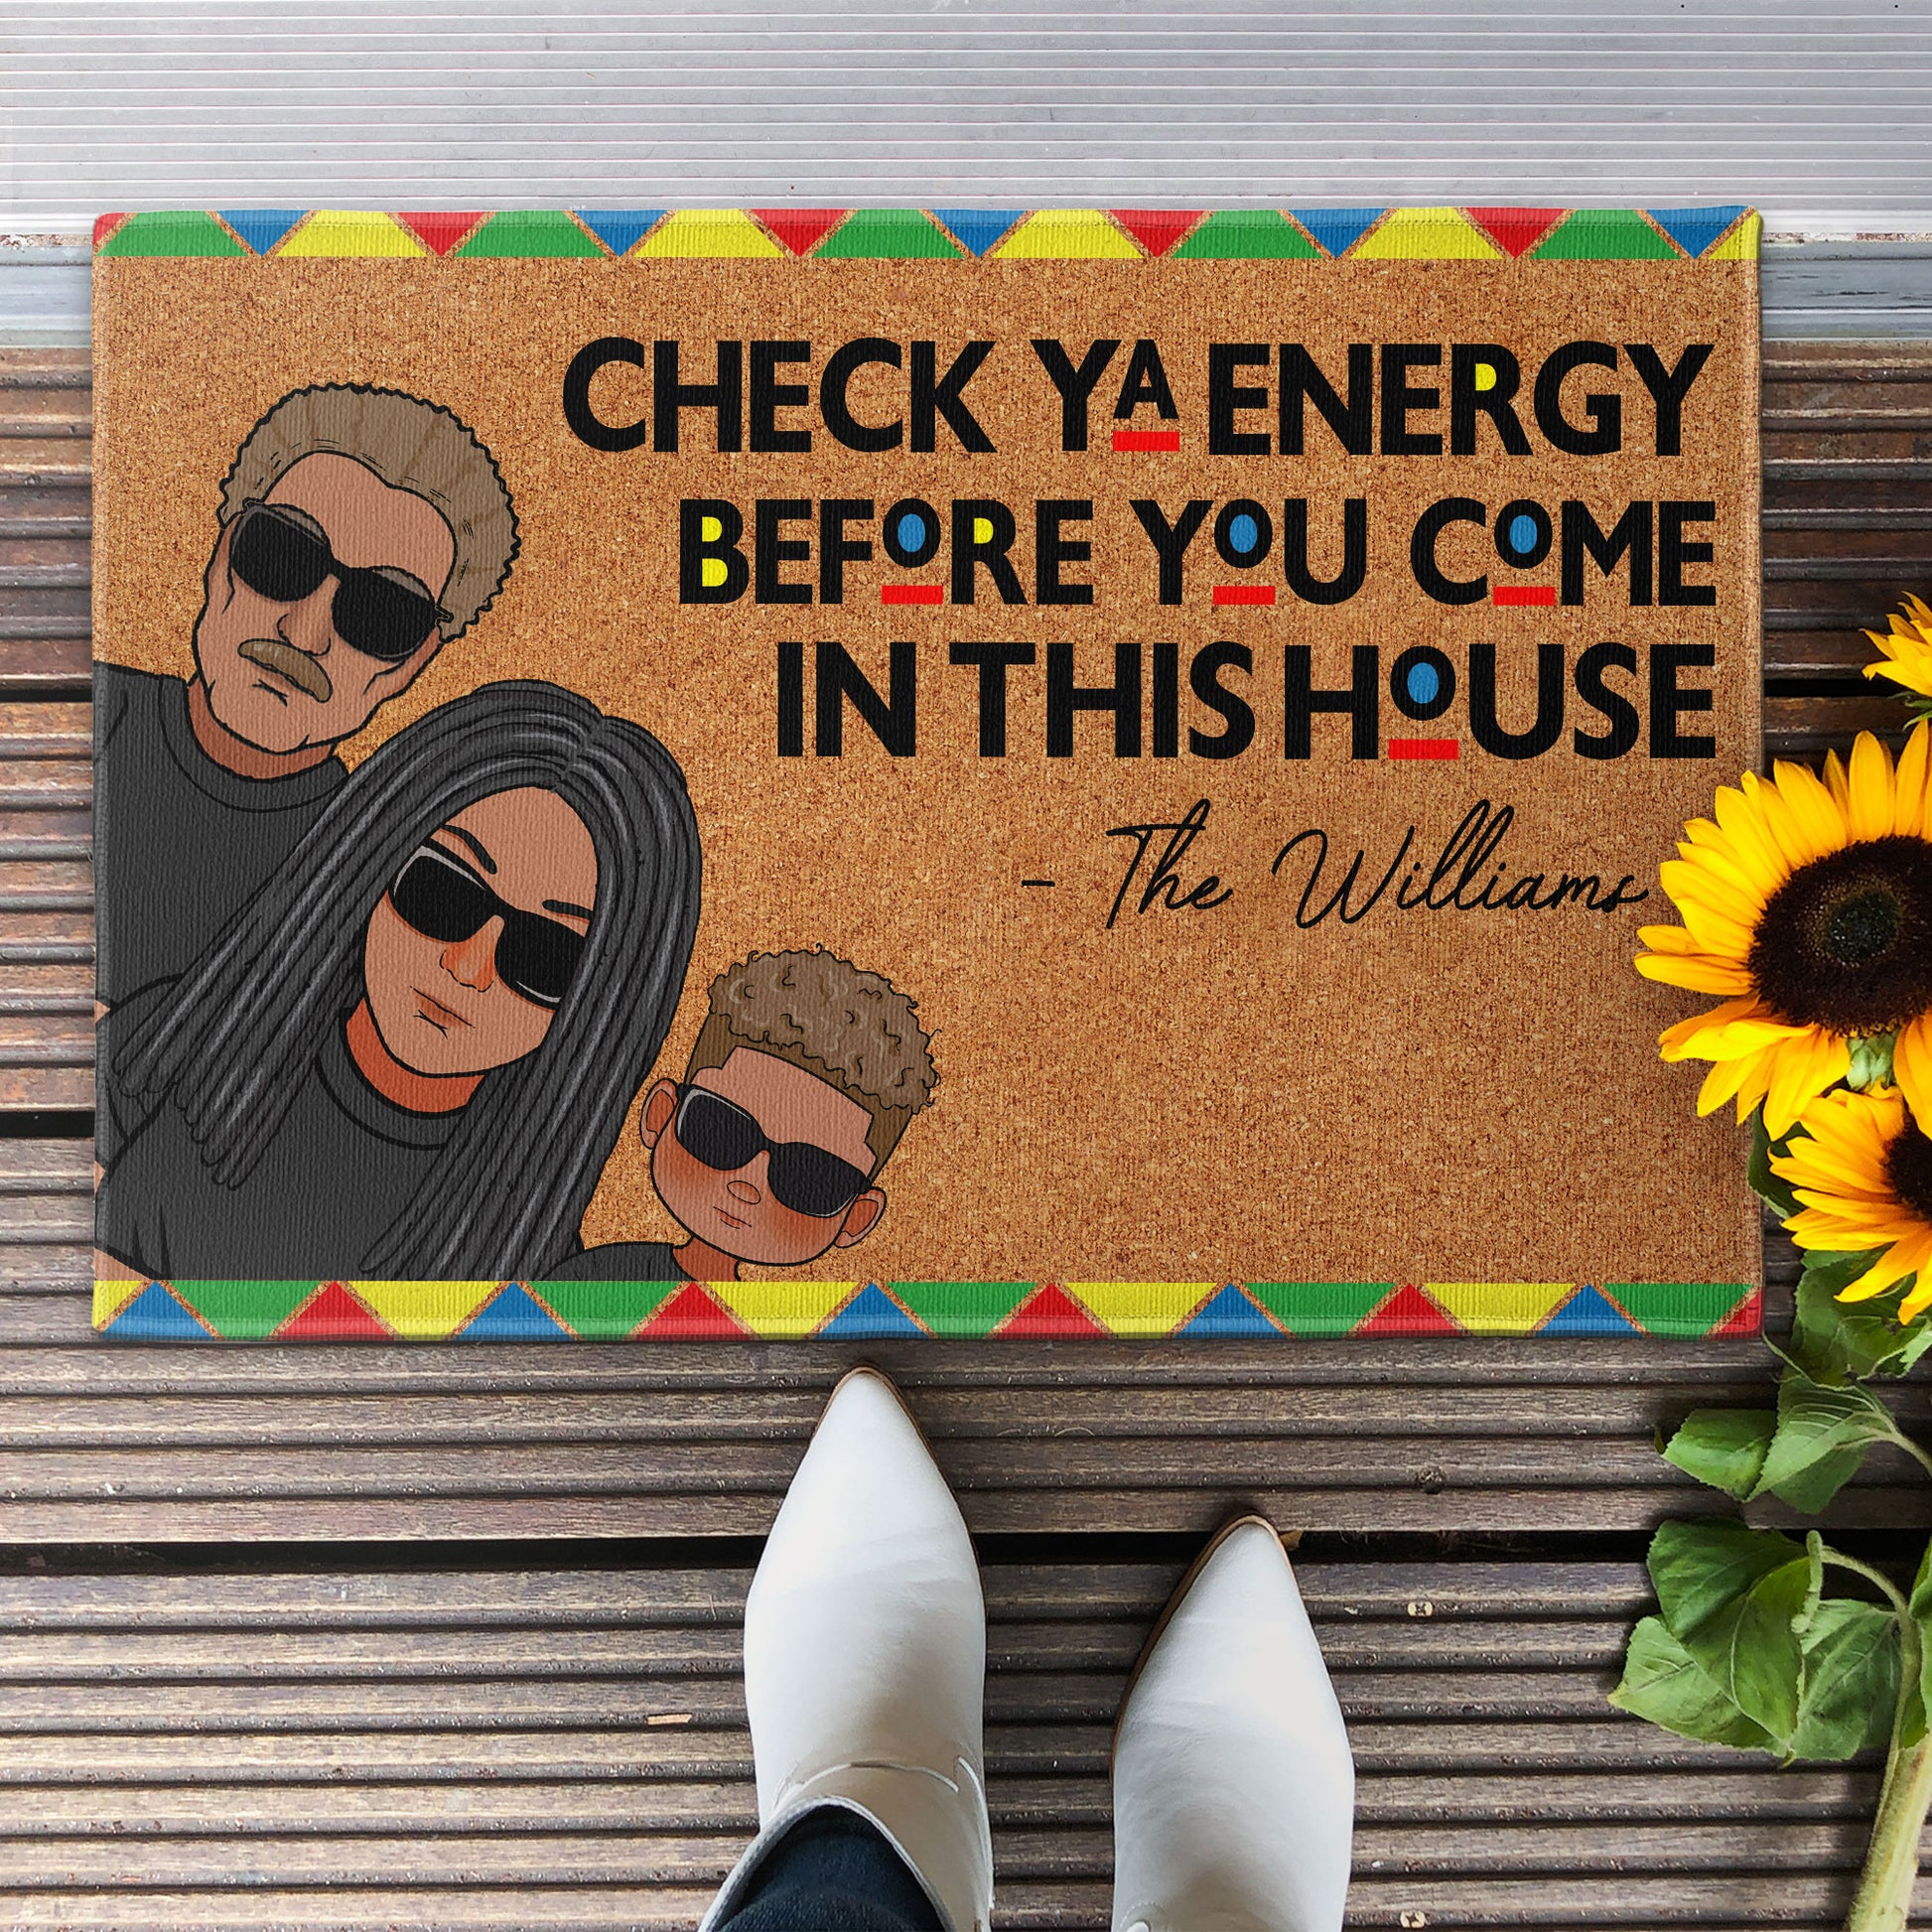 Check Ya Energy Before You Come In This House - Personalized Doormat - Birthday, Loving, Funny, Home Decor Gift For Family, Sisters, Brothers, Siblings, Family Members